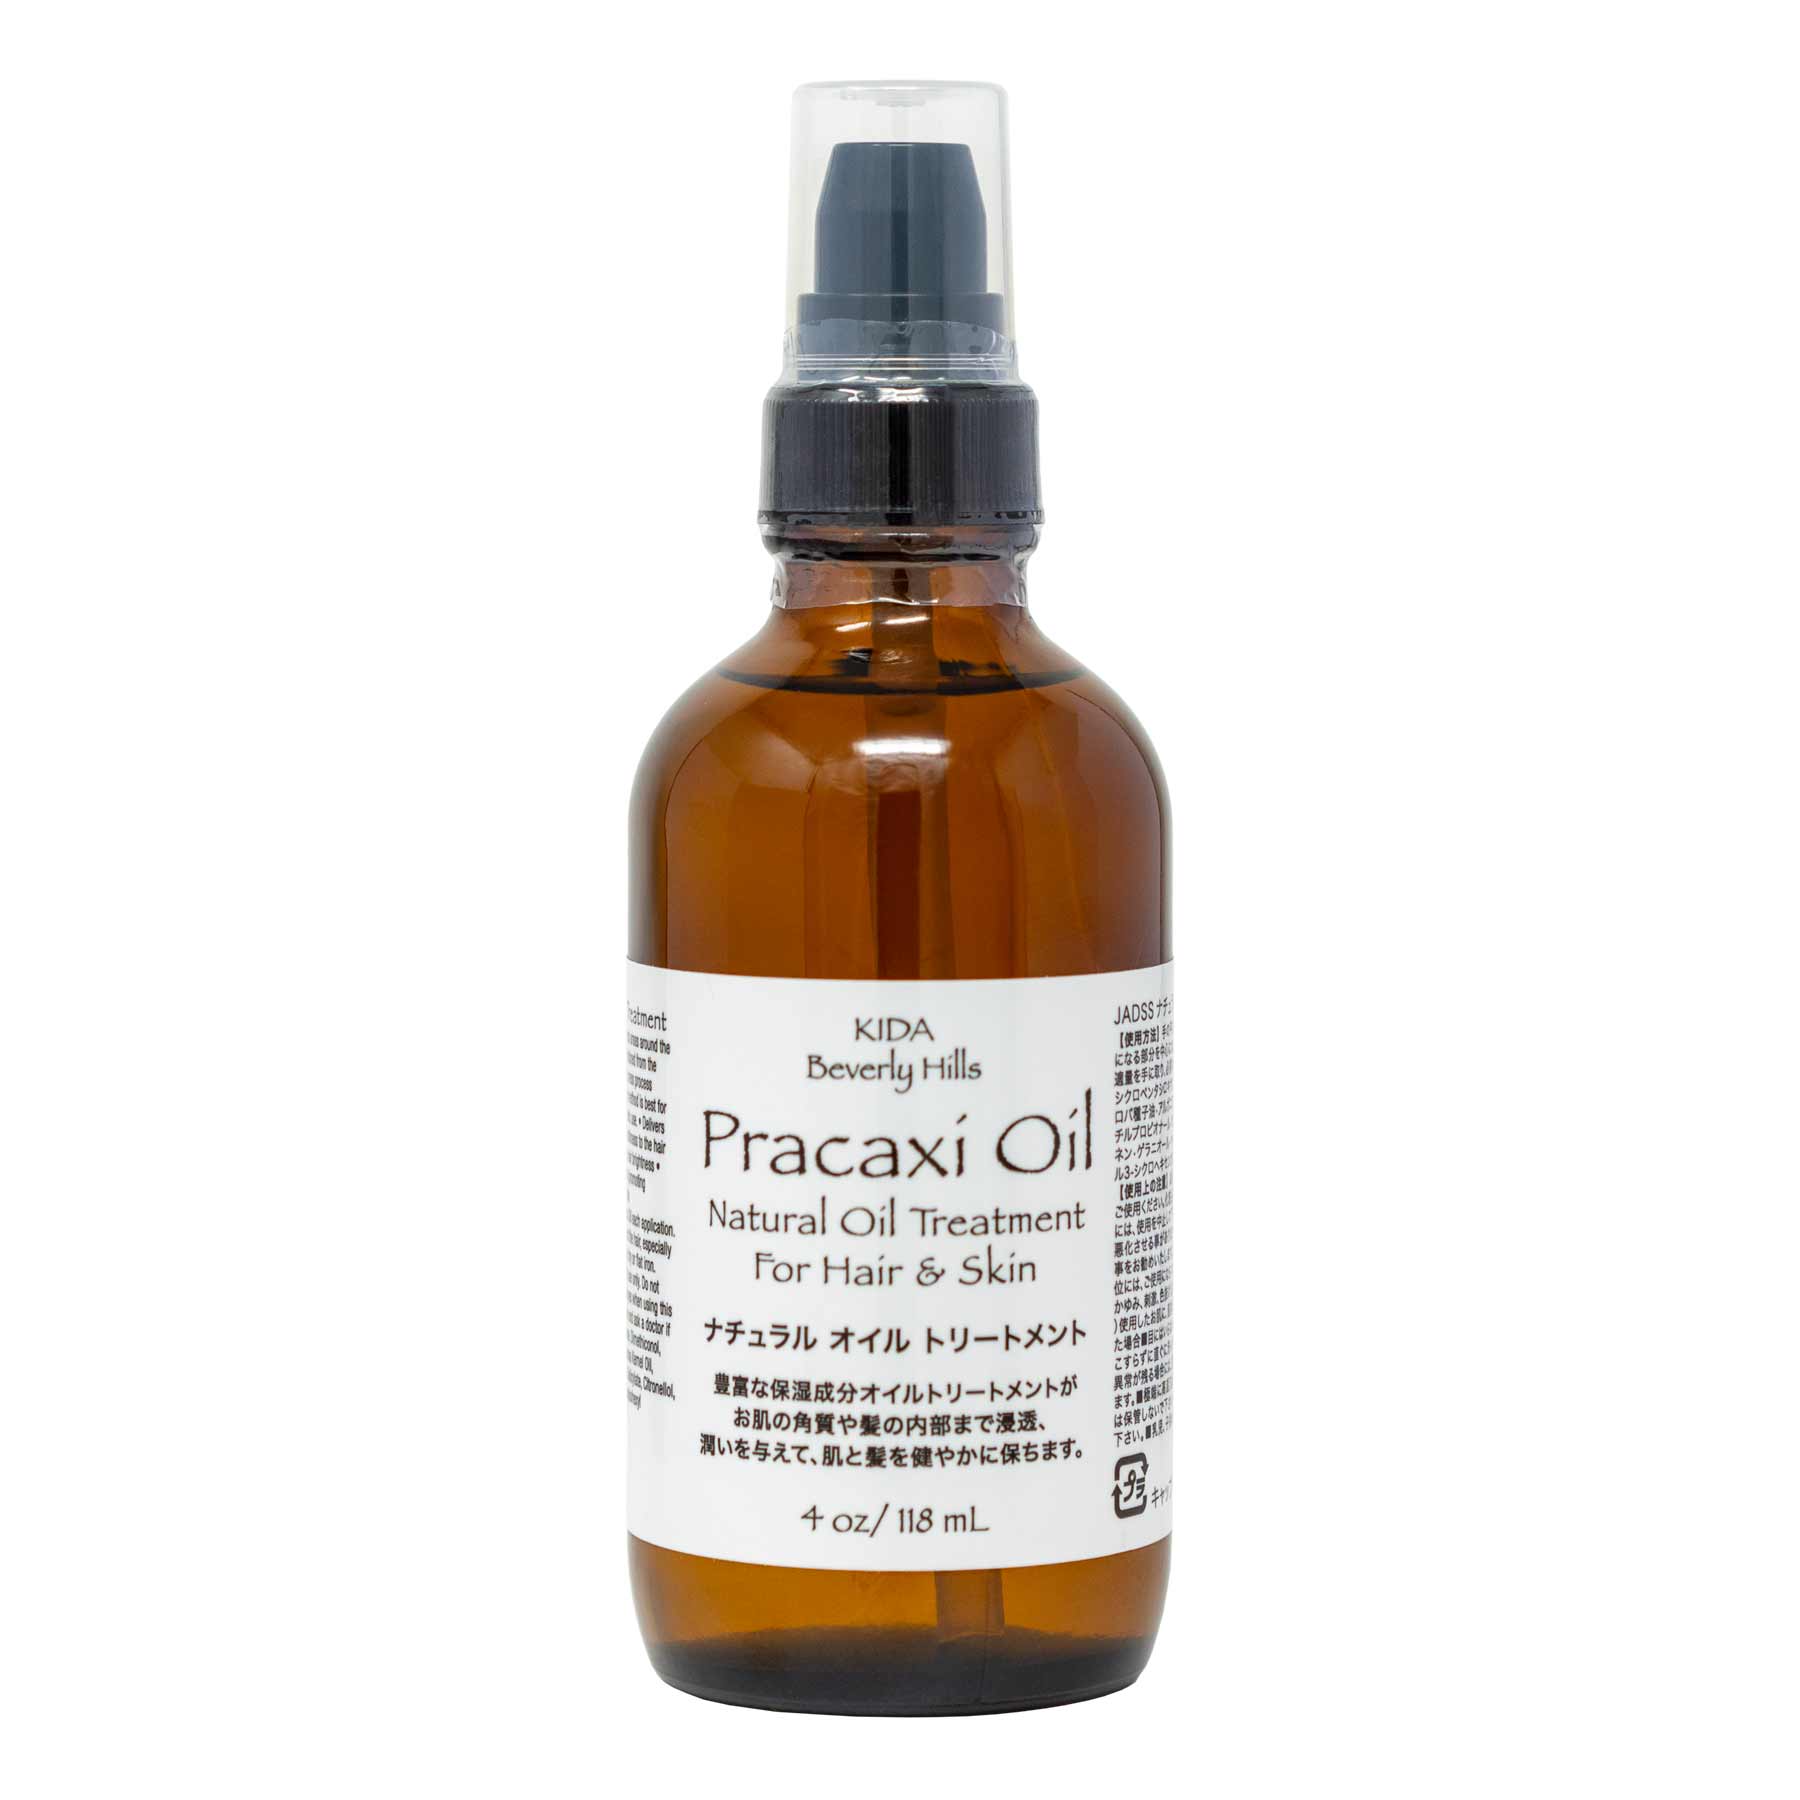 KIDA Beverly Hills Pracaxi Oil Natural Oil Treatment for Hair and Skin